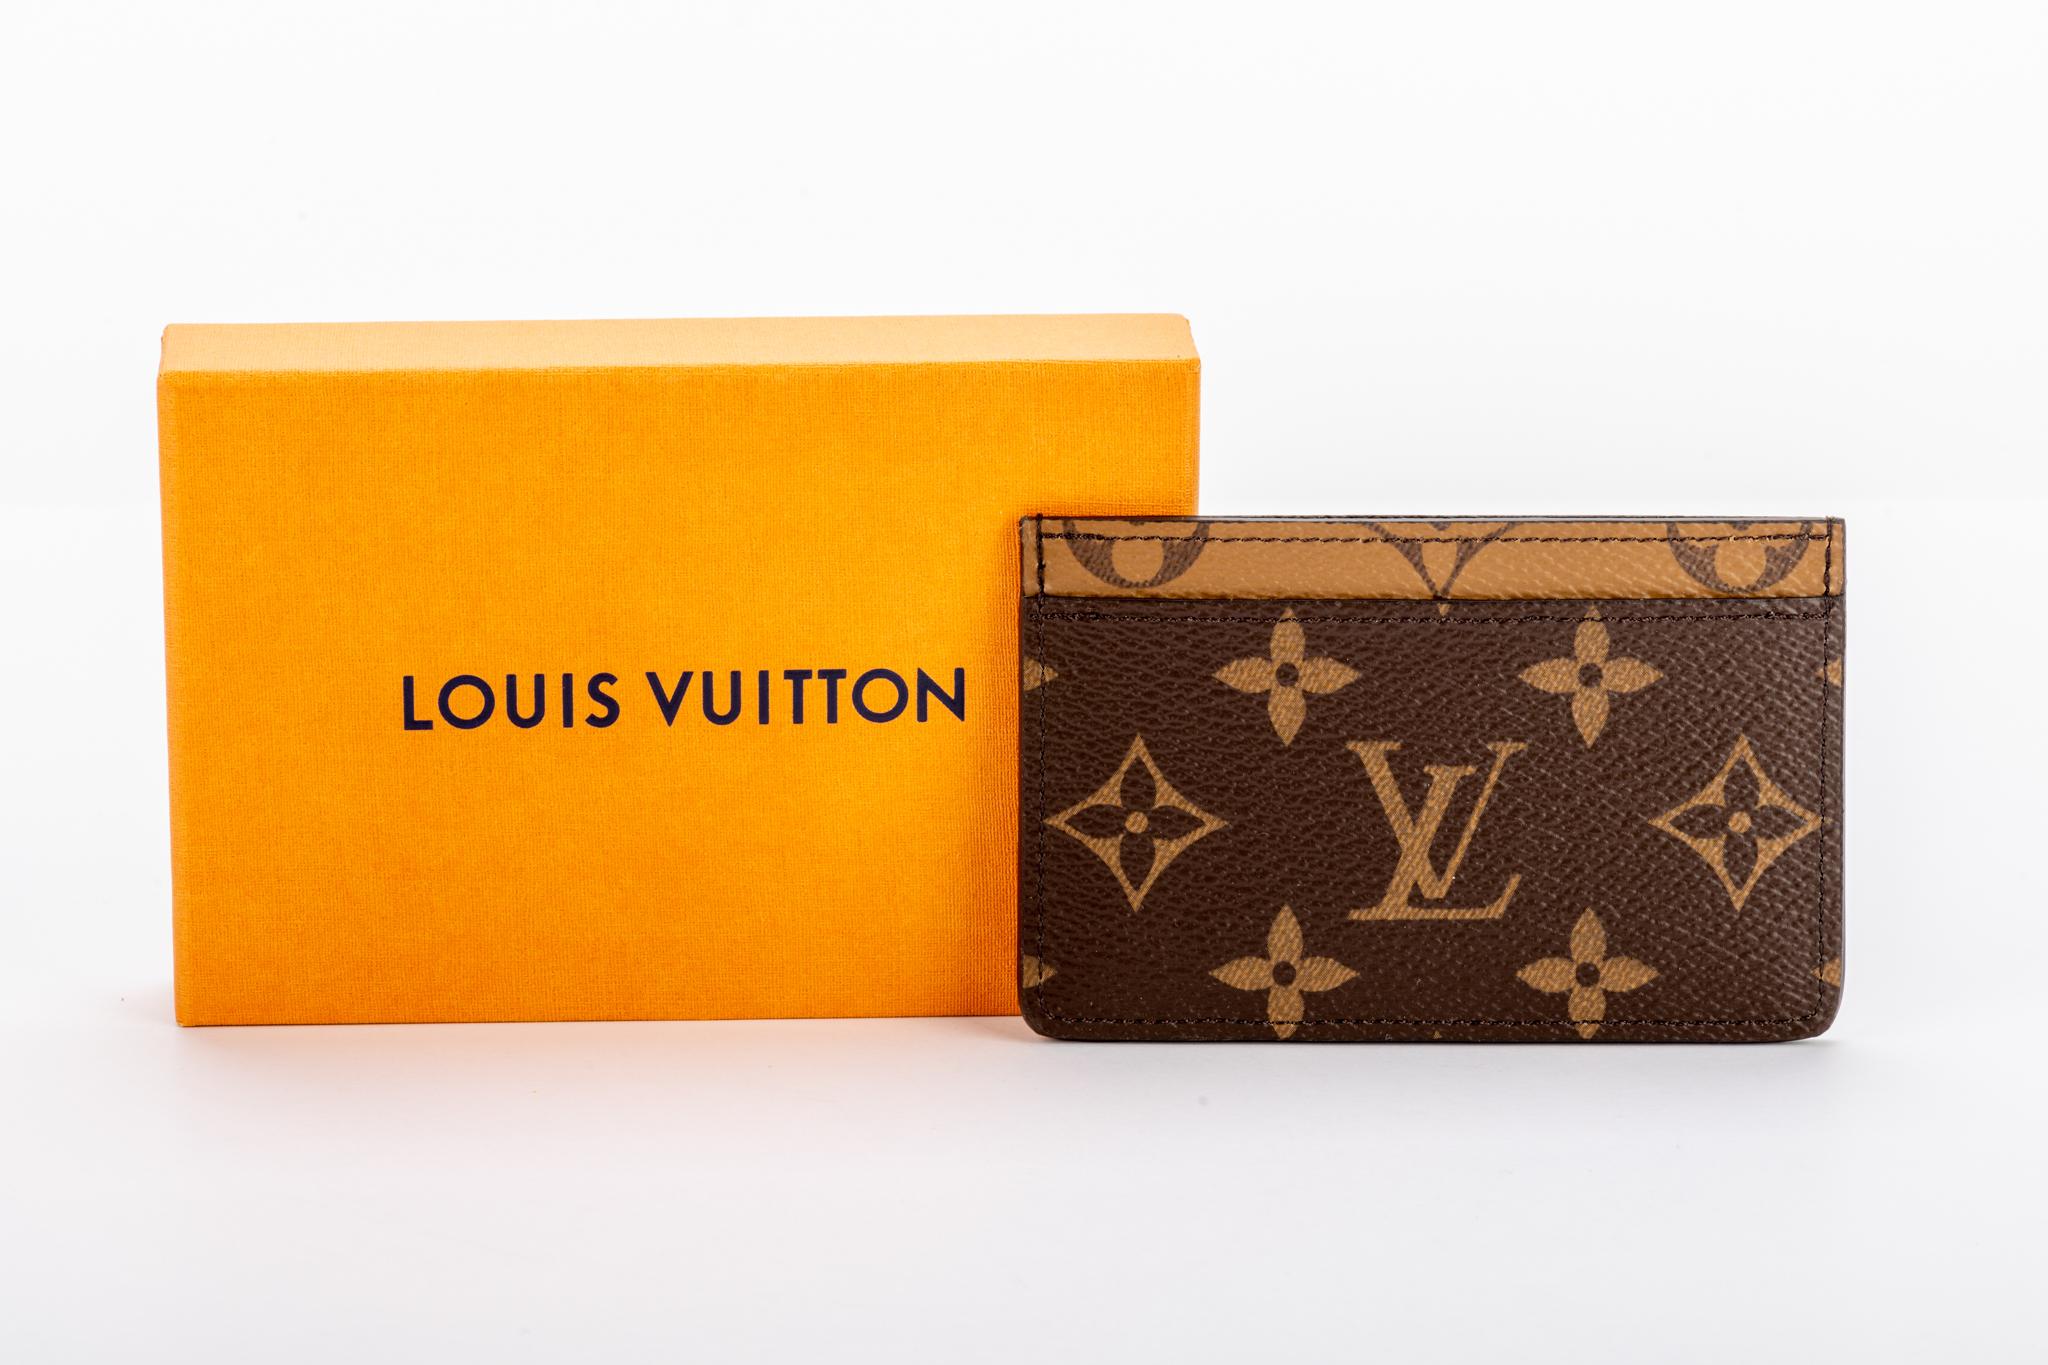 Vuitton two tone coated canvas monogram credit card case. Comes with original box.